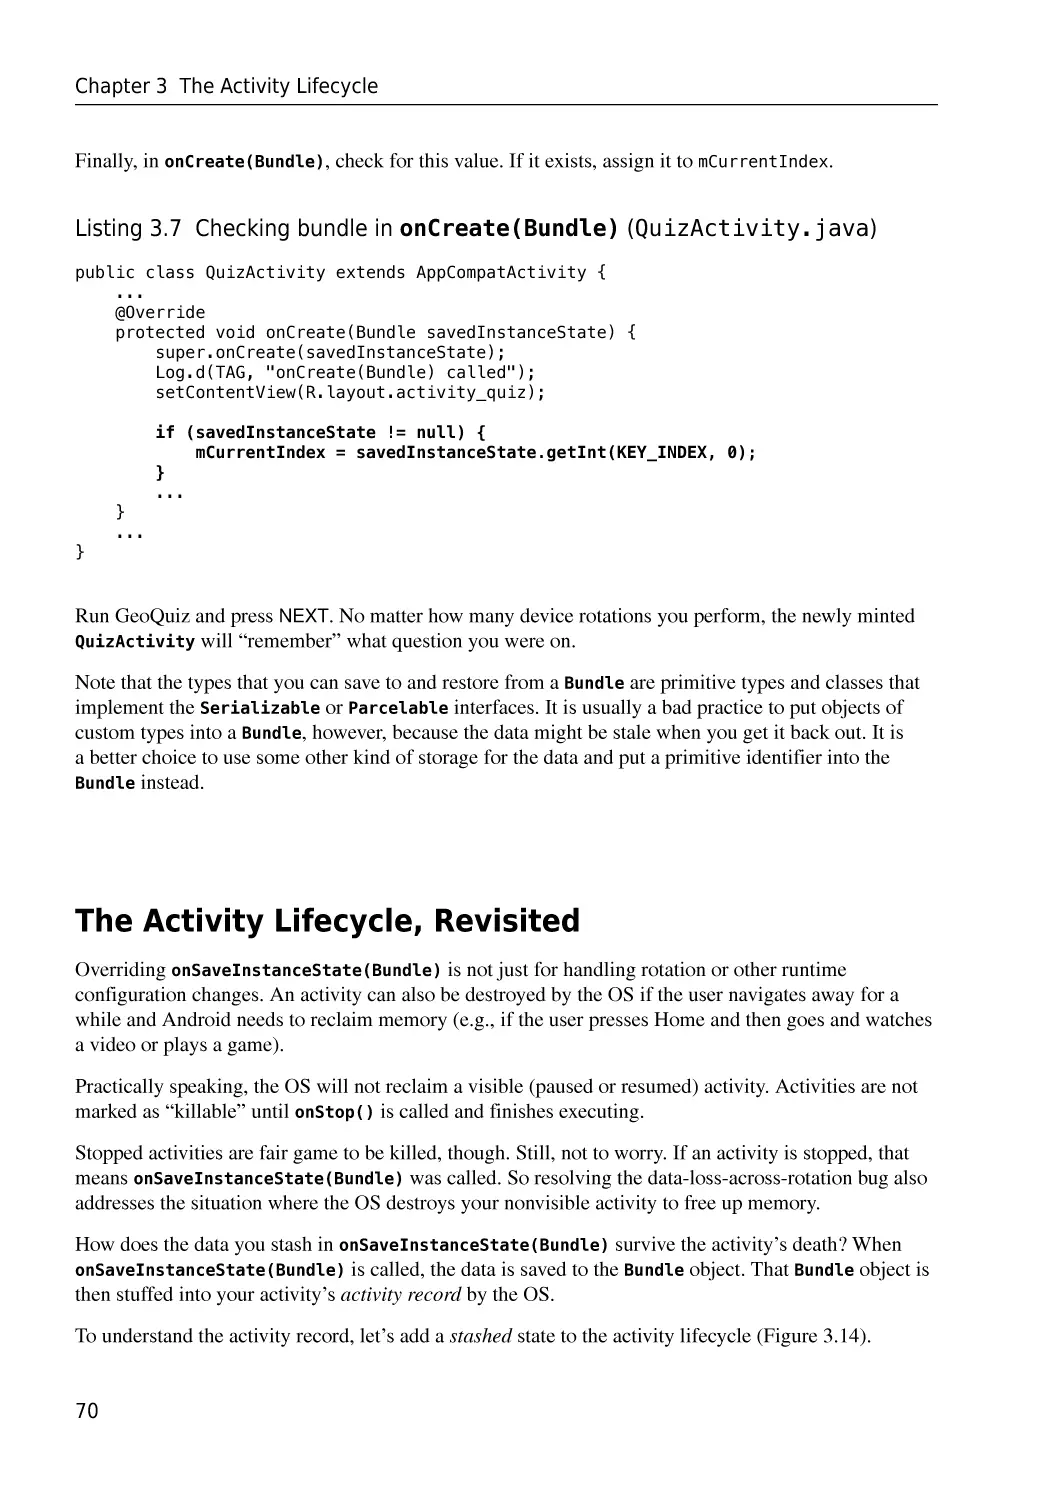 The Activity Lifecycle, Revisited